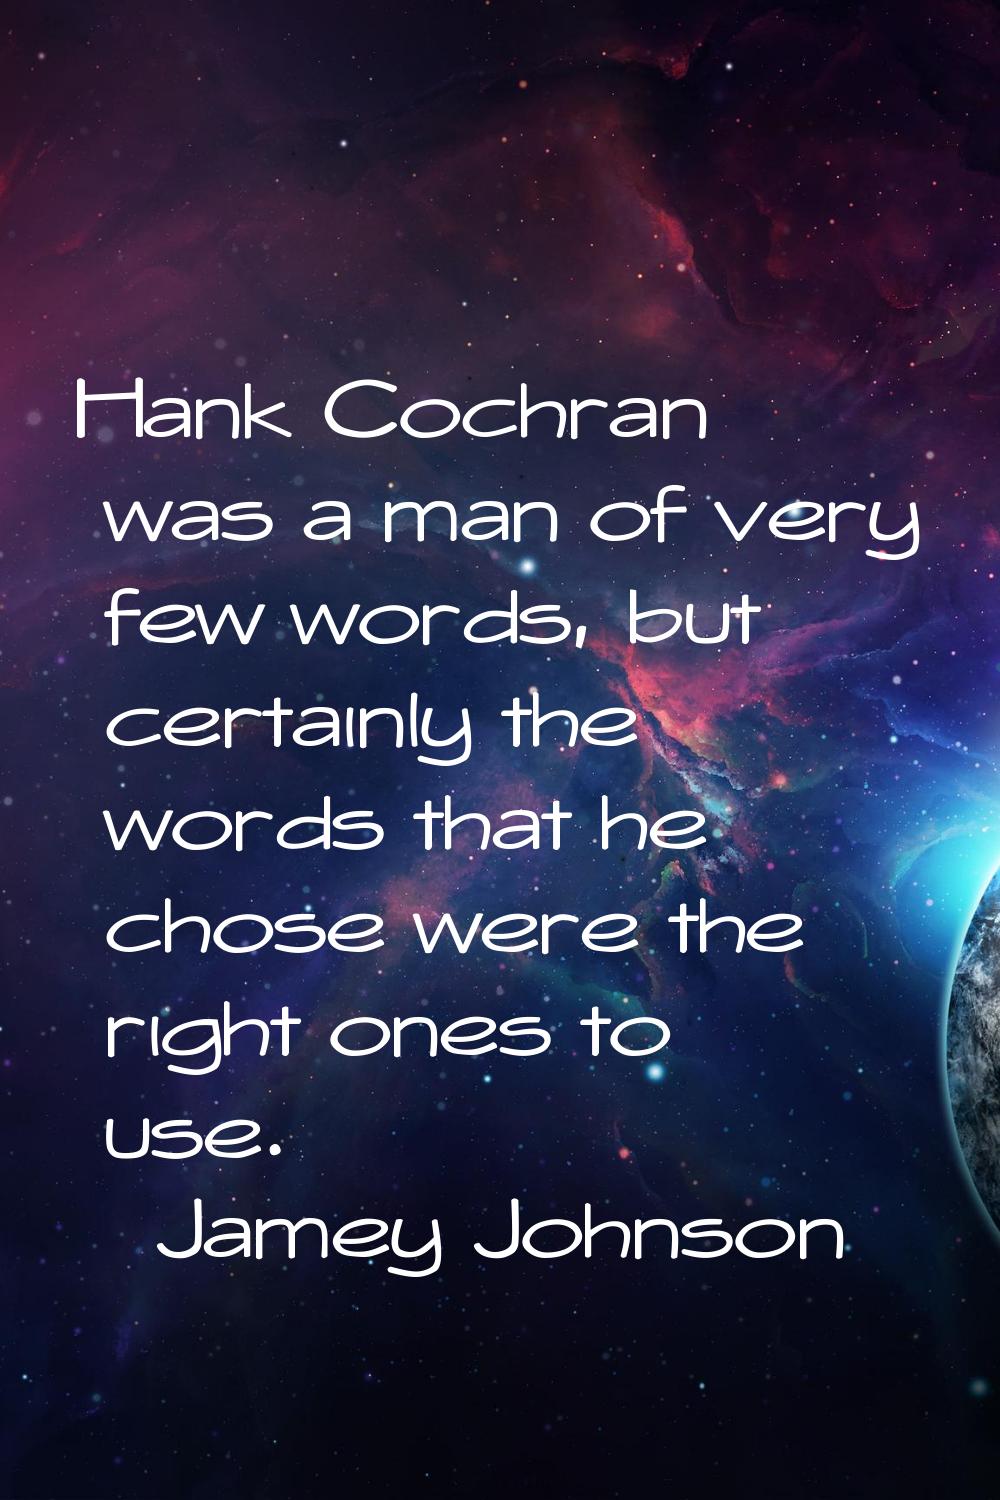 Hank Cochran was a man of very few words, but certainly the words that he chose were the right ones